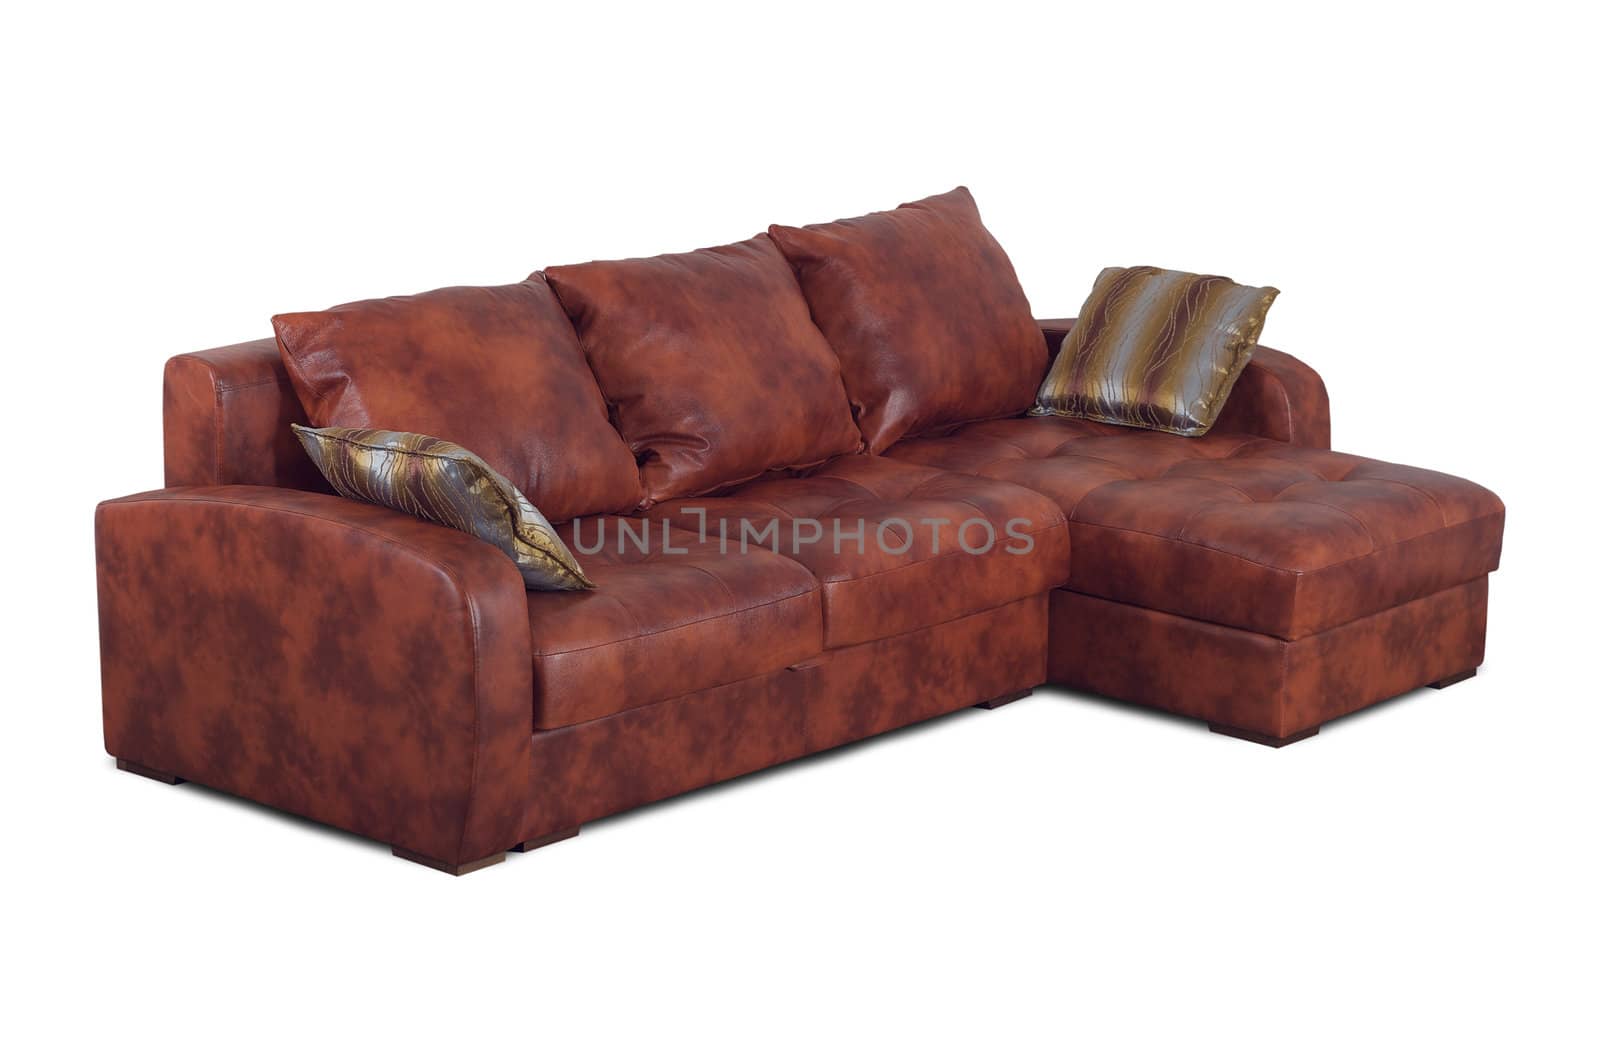 Brown leather sofa with pillows isolated on a white background.